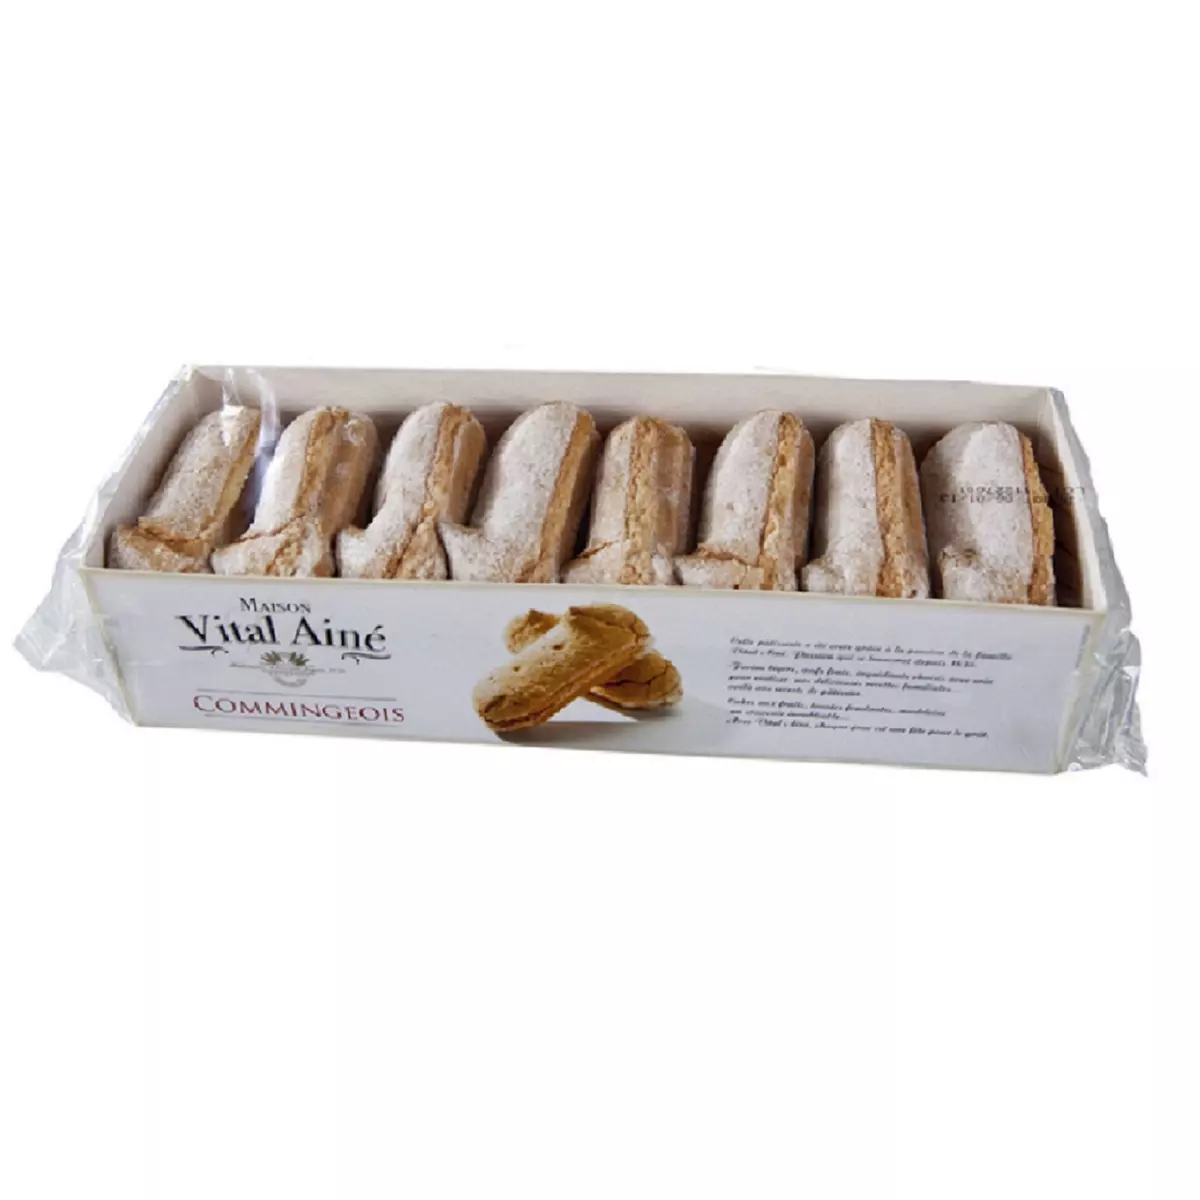 MAISON VITAL AINE Biscuits Commingeois 170g